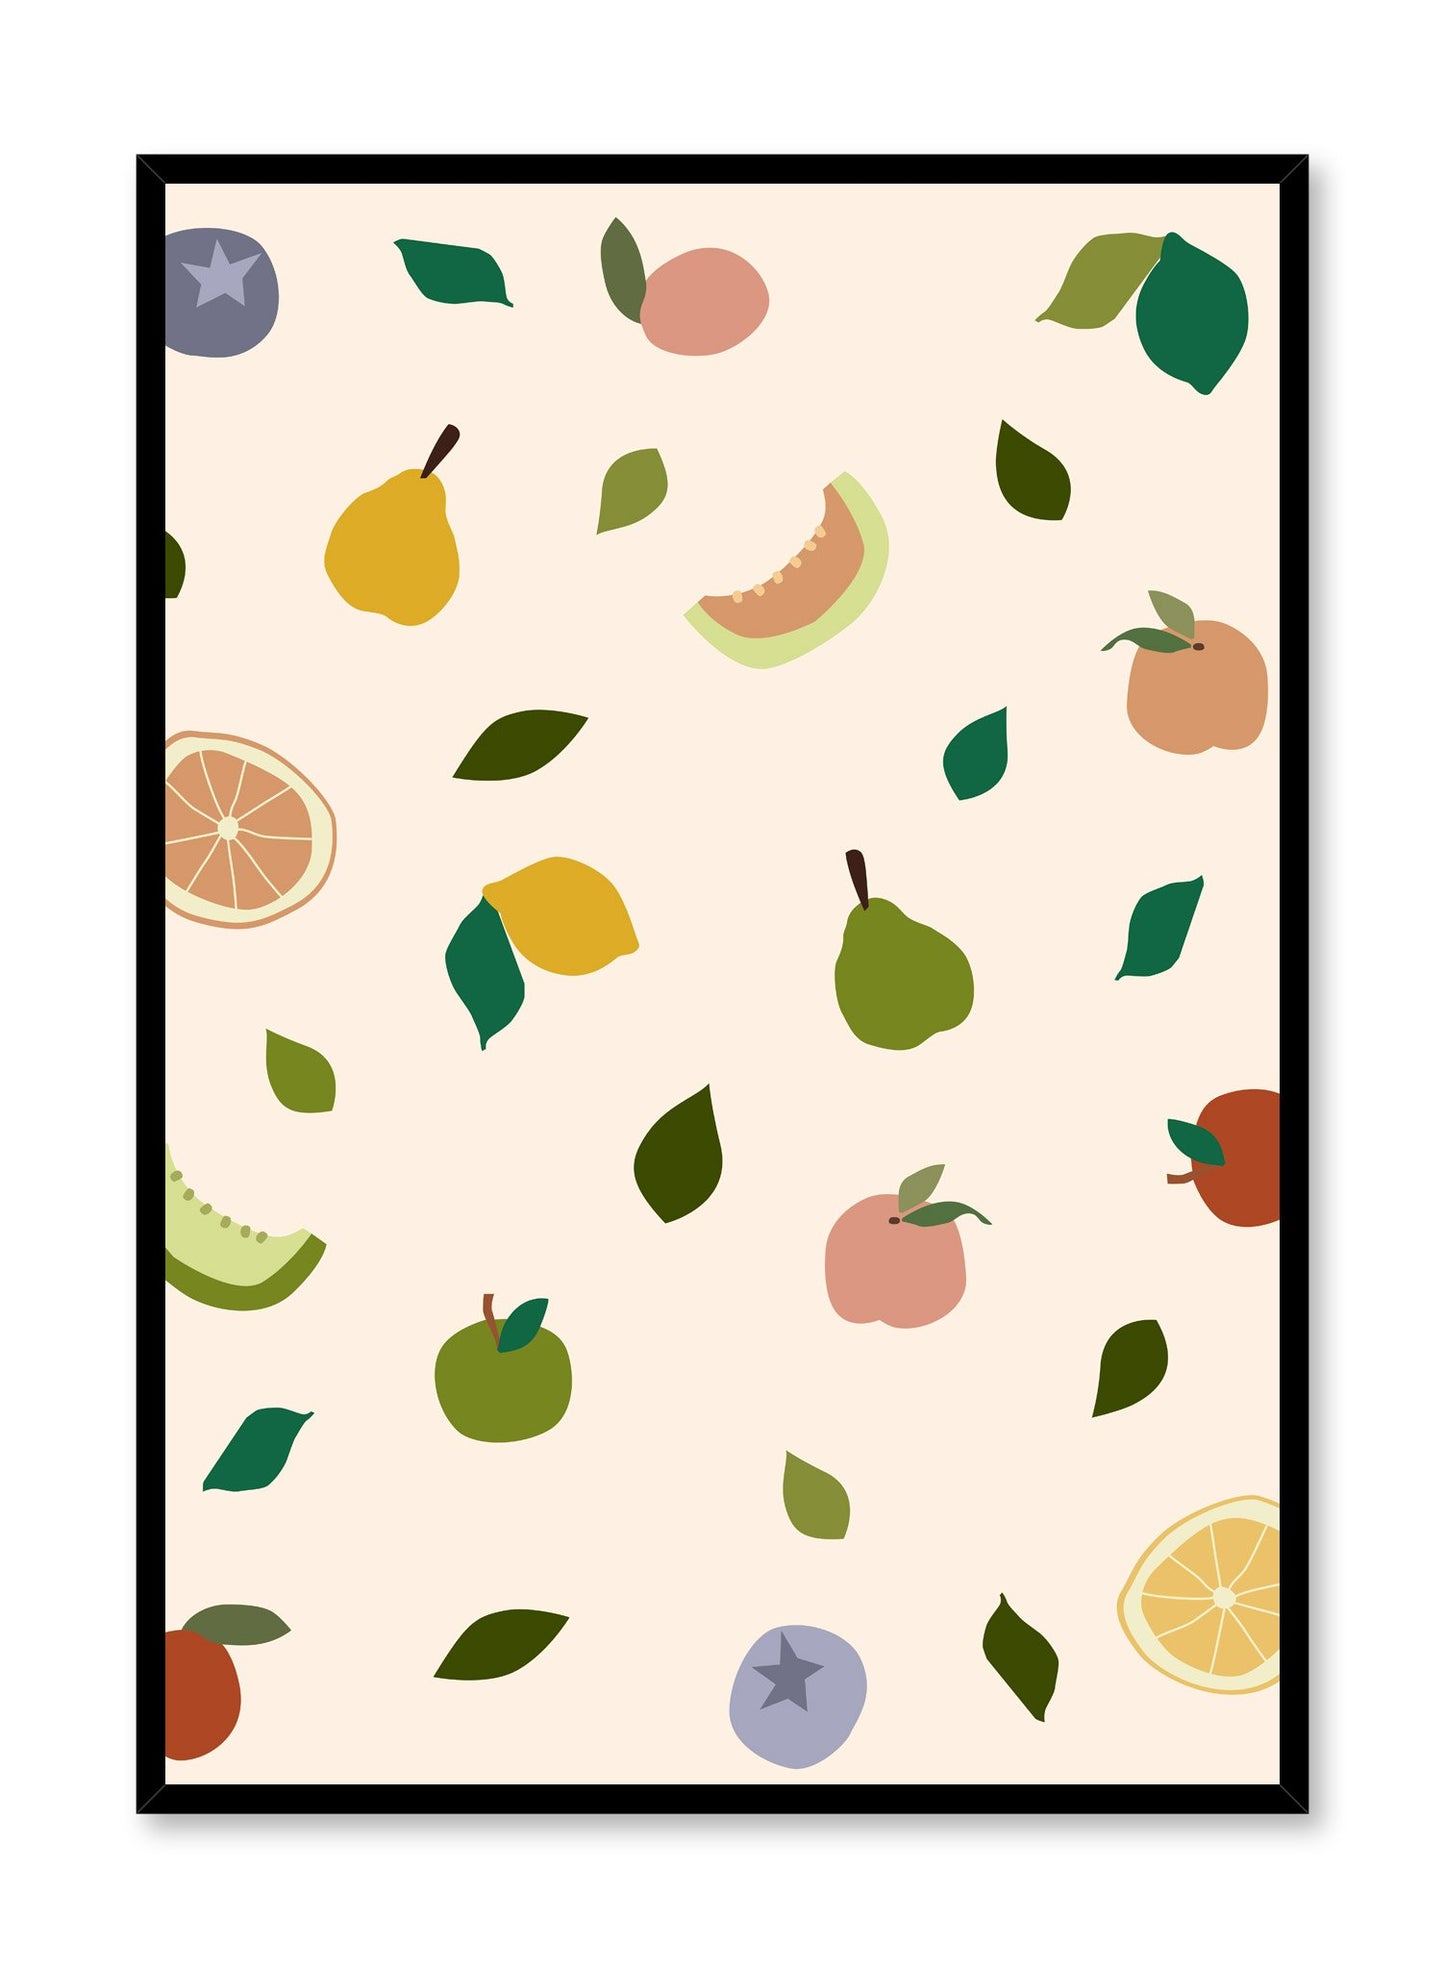 Fruit Explosion is a fruit illustration poster by Opposite Wall.